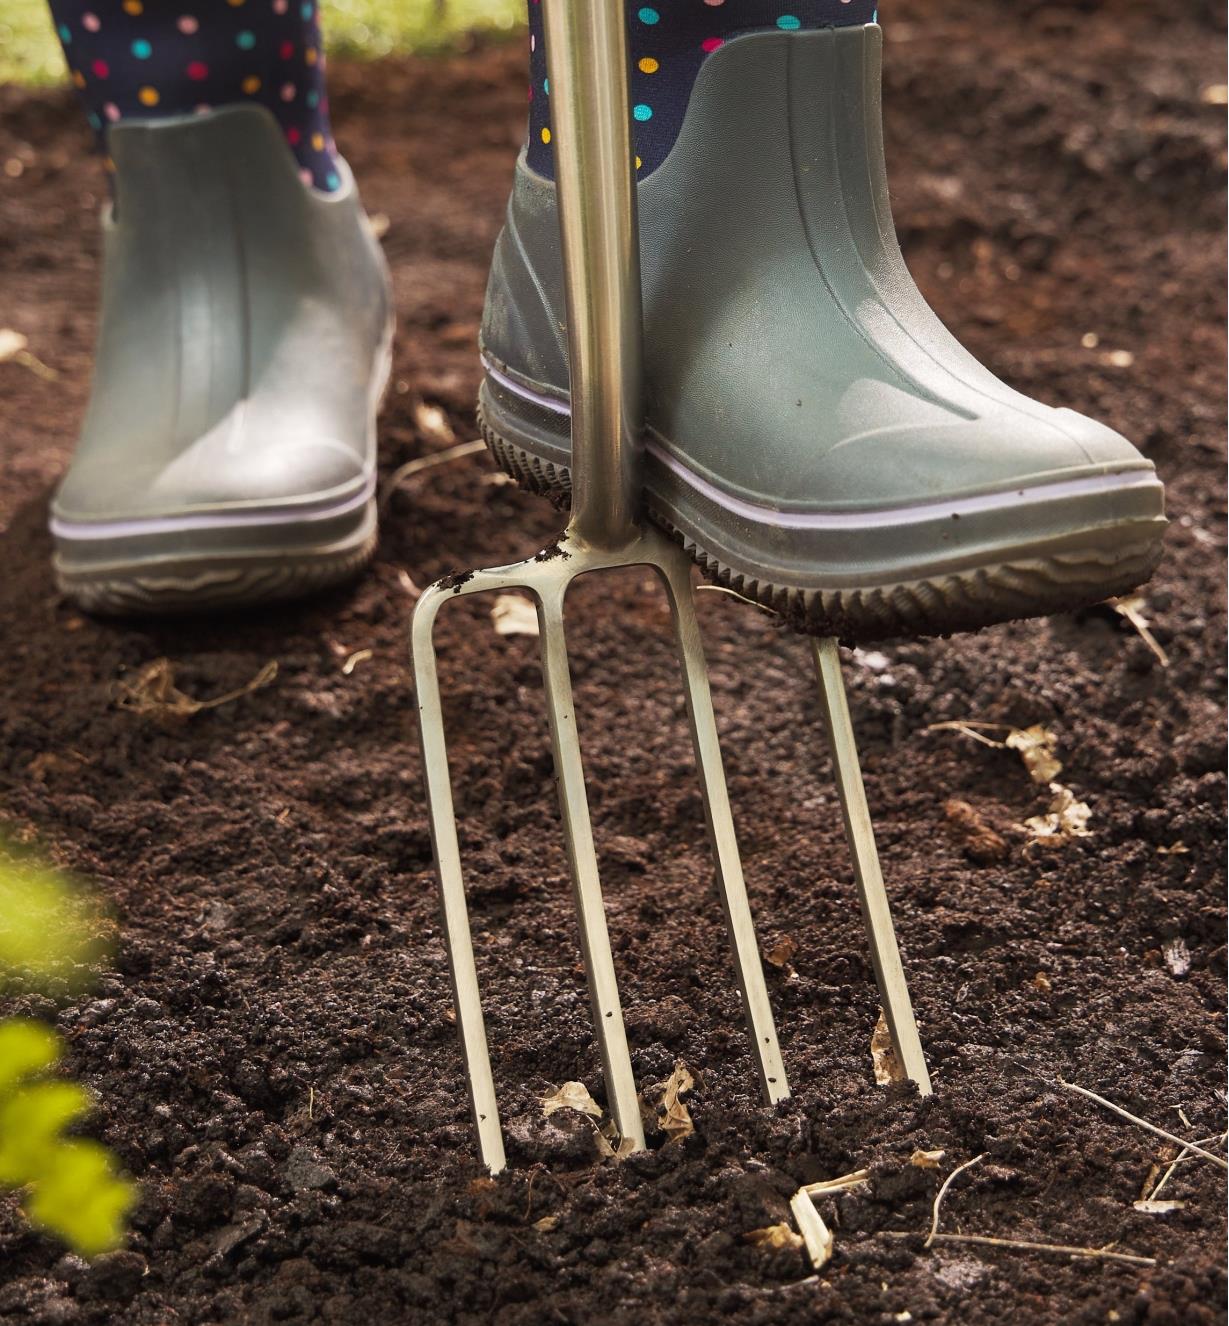 A closer view of a child wearing rubber boots pushing the digging fork into soil with one foot